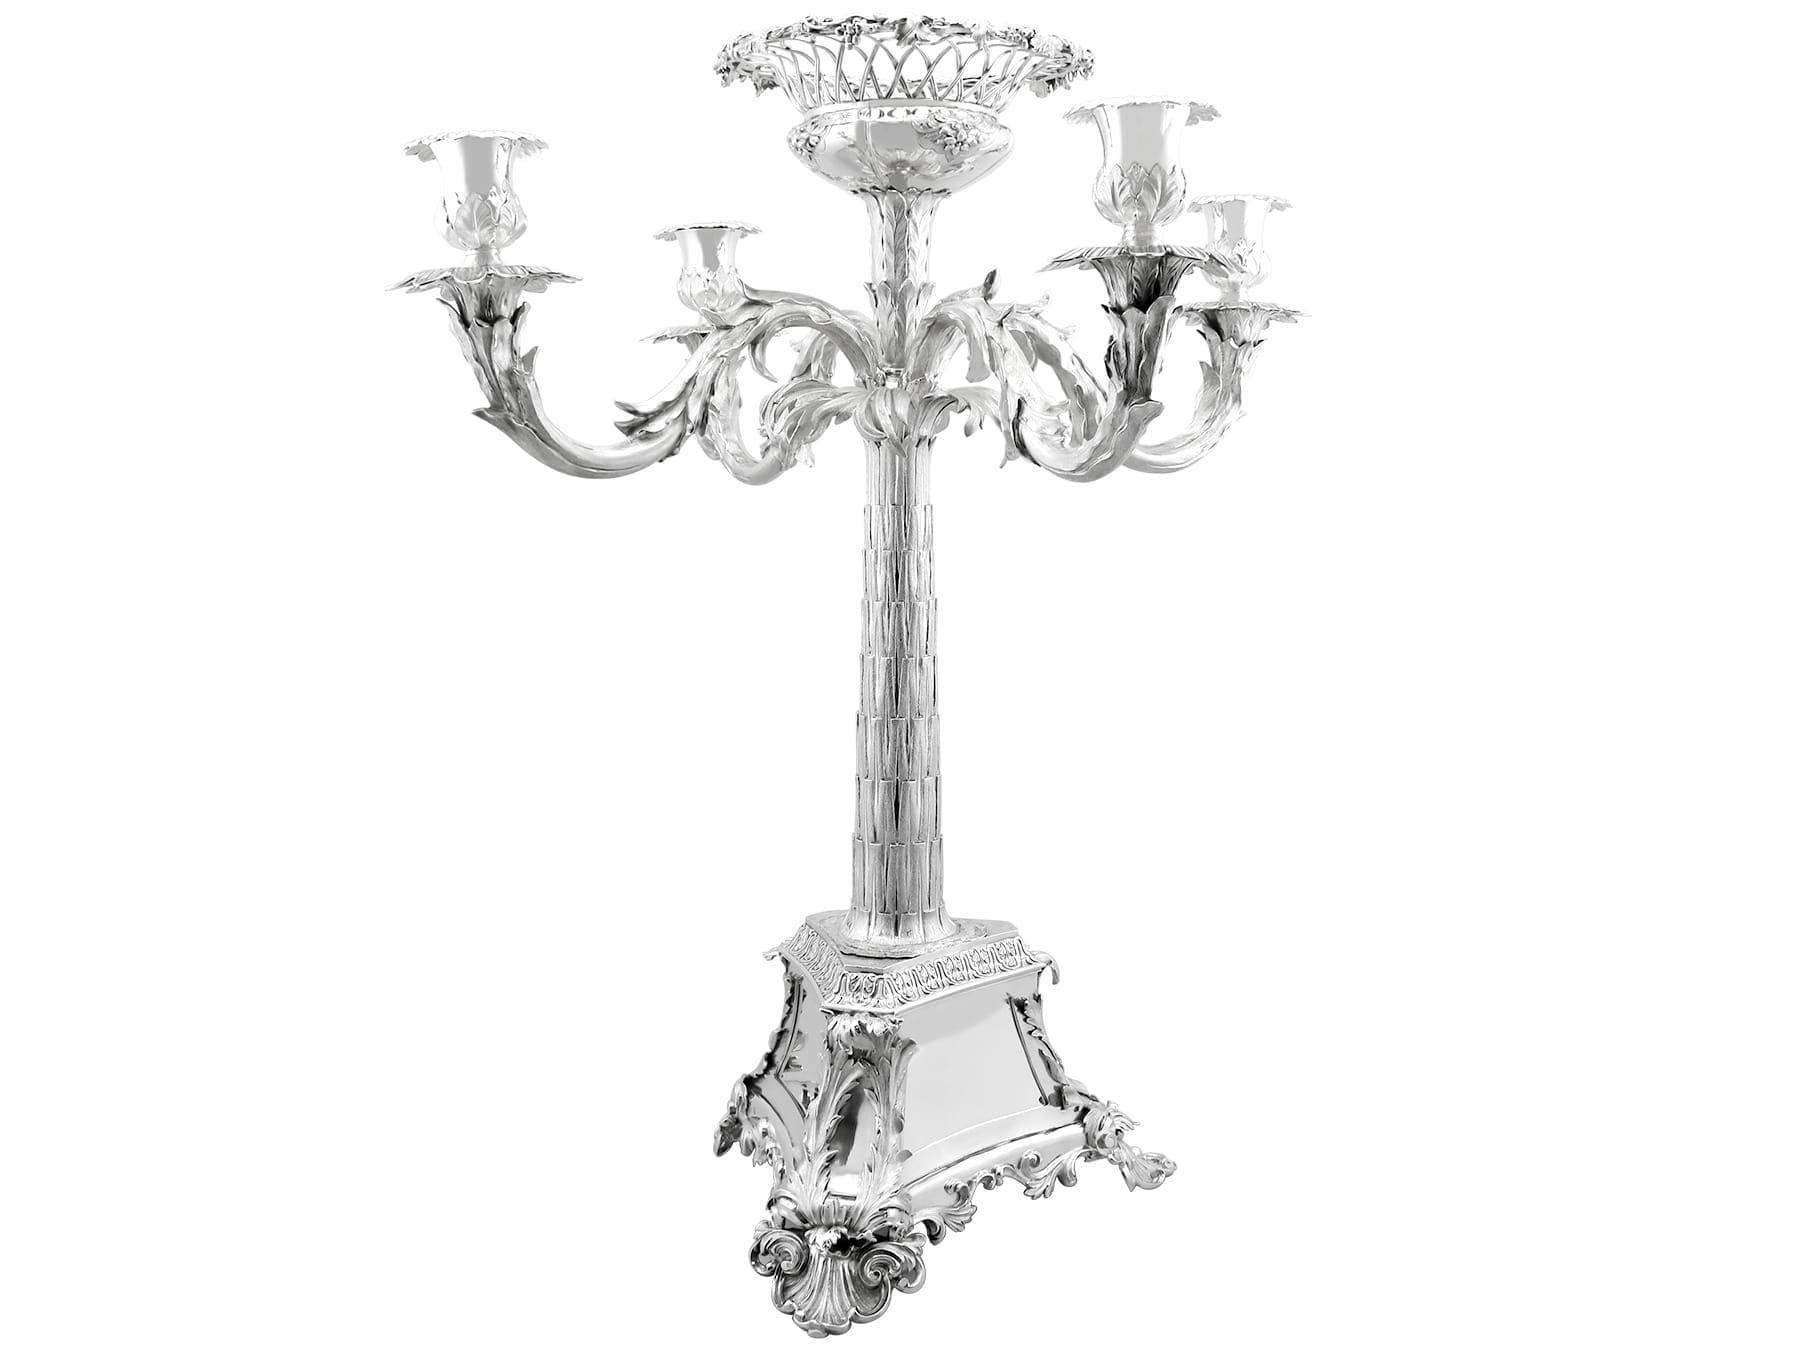 A magnificent, fine and impressive, large antique Victorian English sterling silver four light candelabrum centrepiece; an addition to our ornamental silverware collection.

This magnificent antique English sterling silver four light candelabrum has